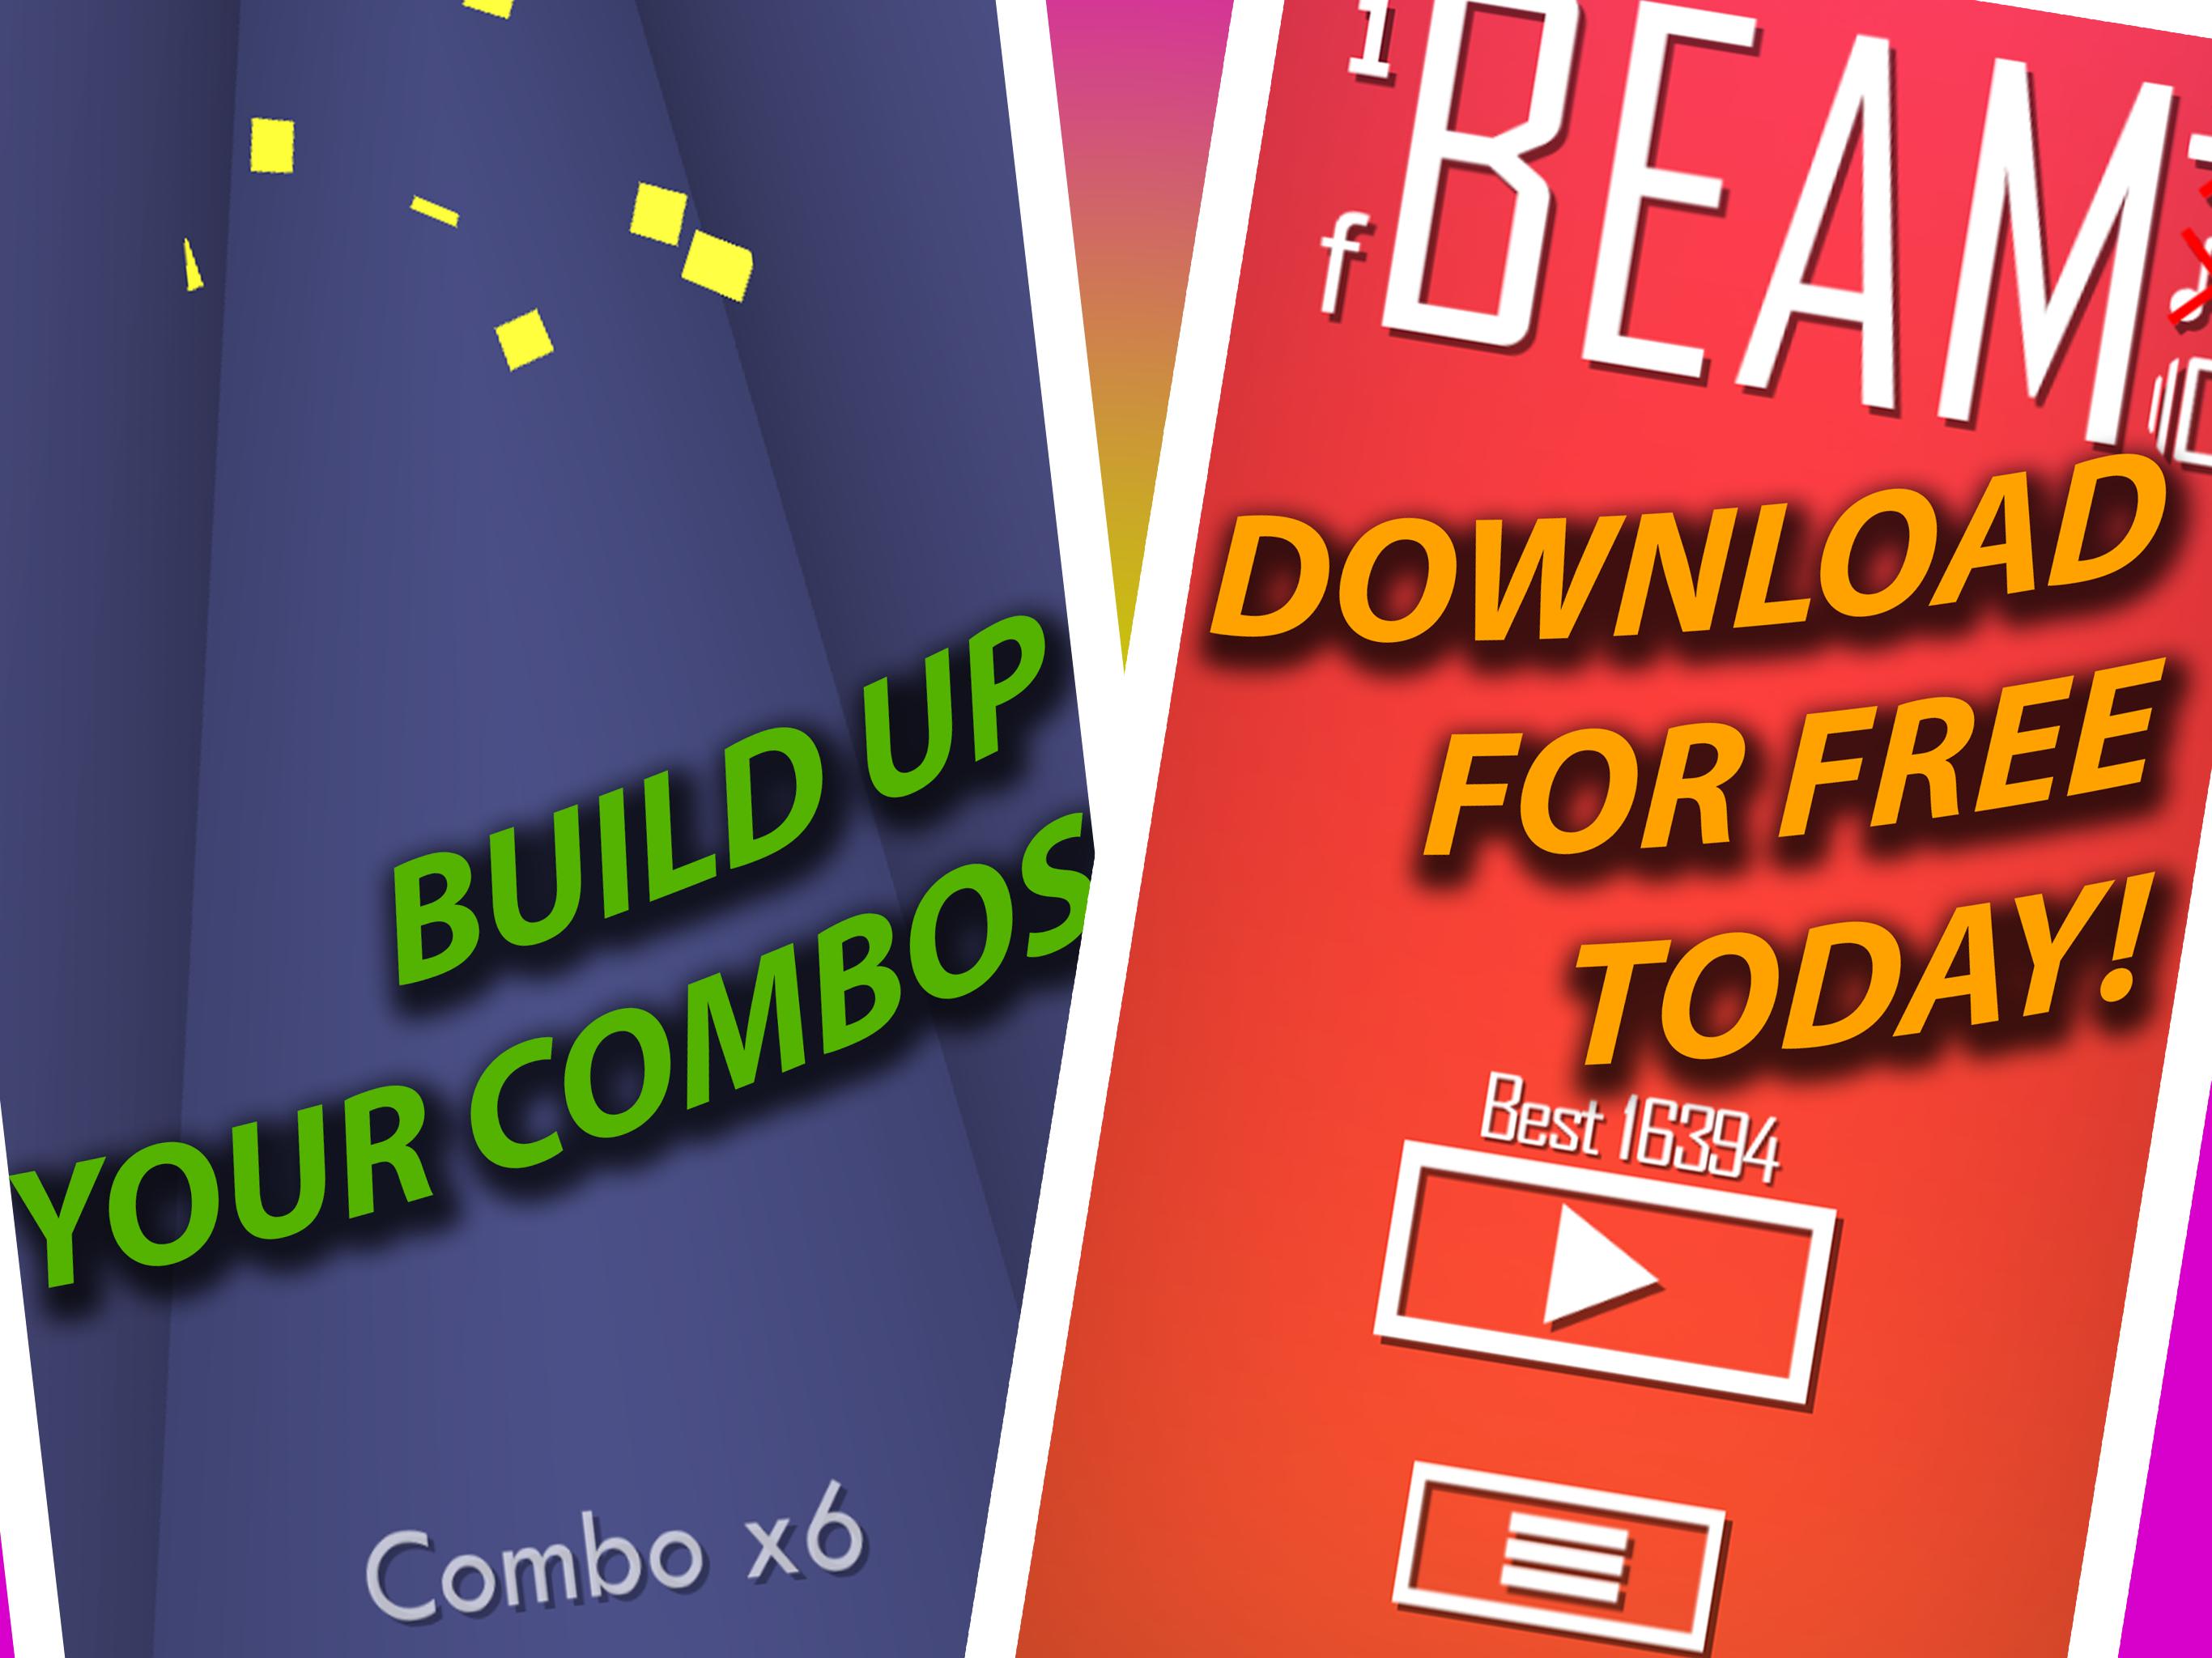 Beam The Arcade Game For Android Apk Download - roblox api beam